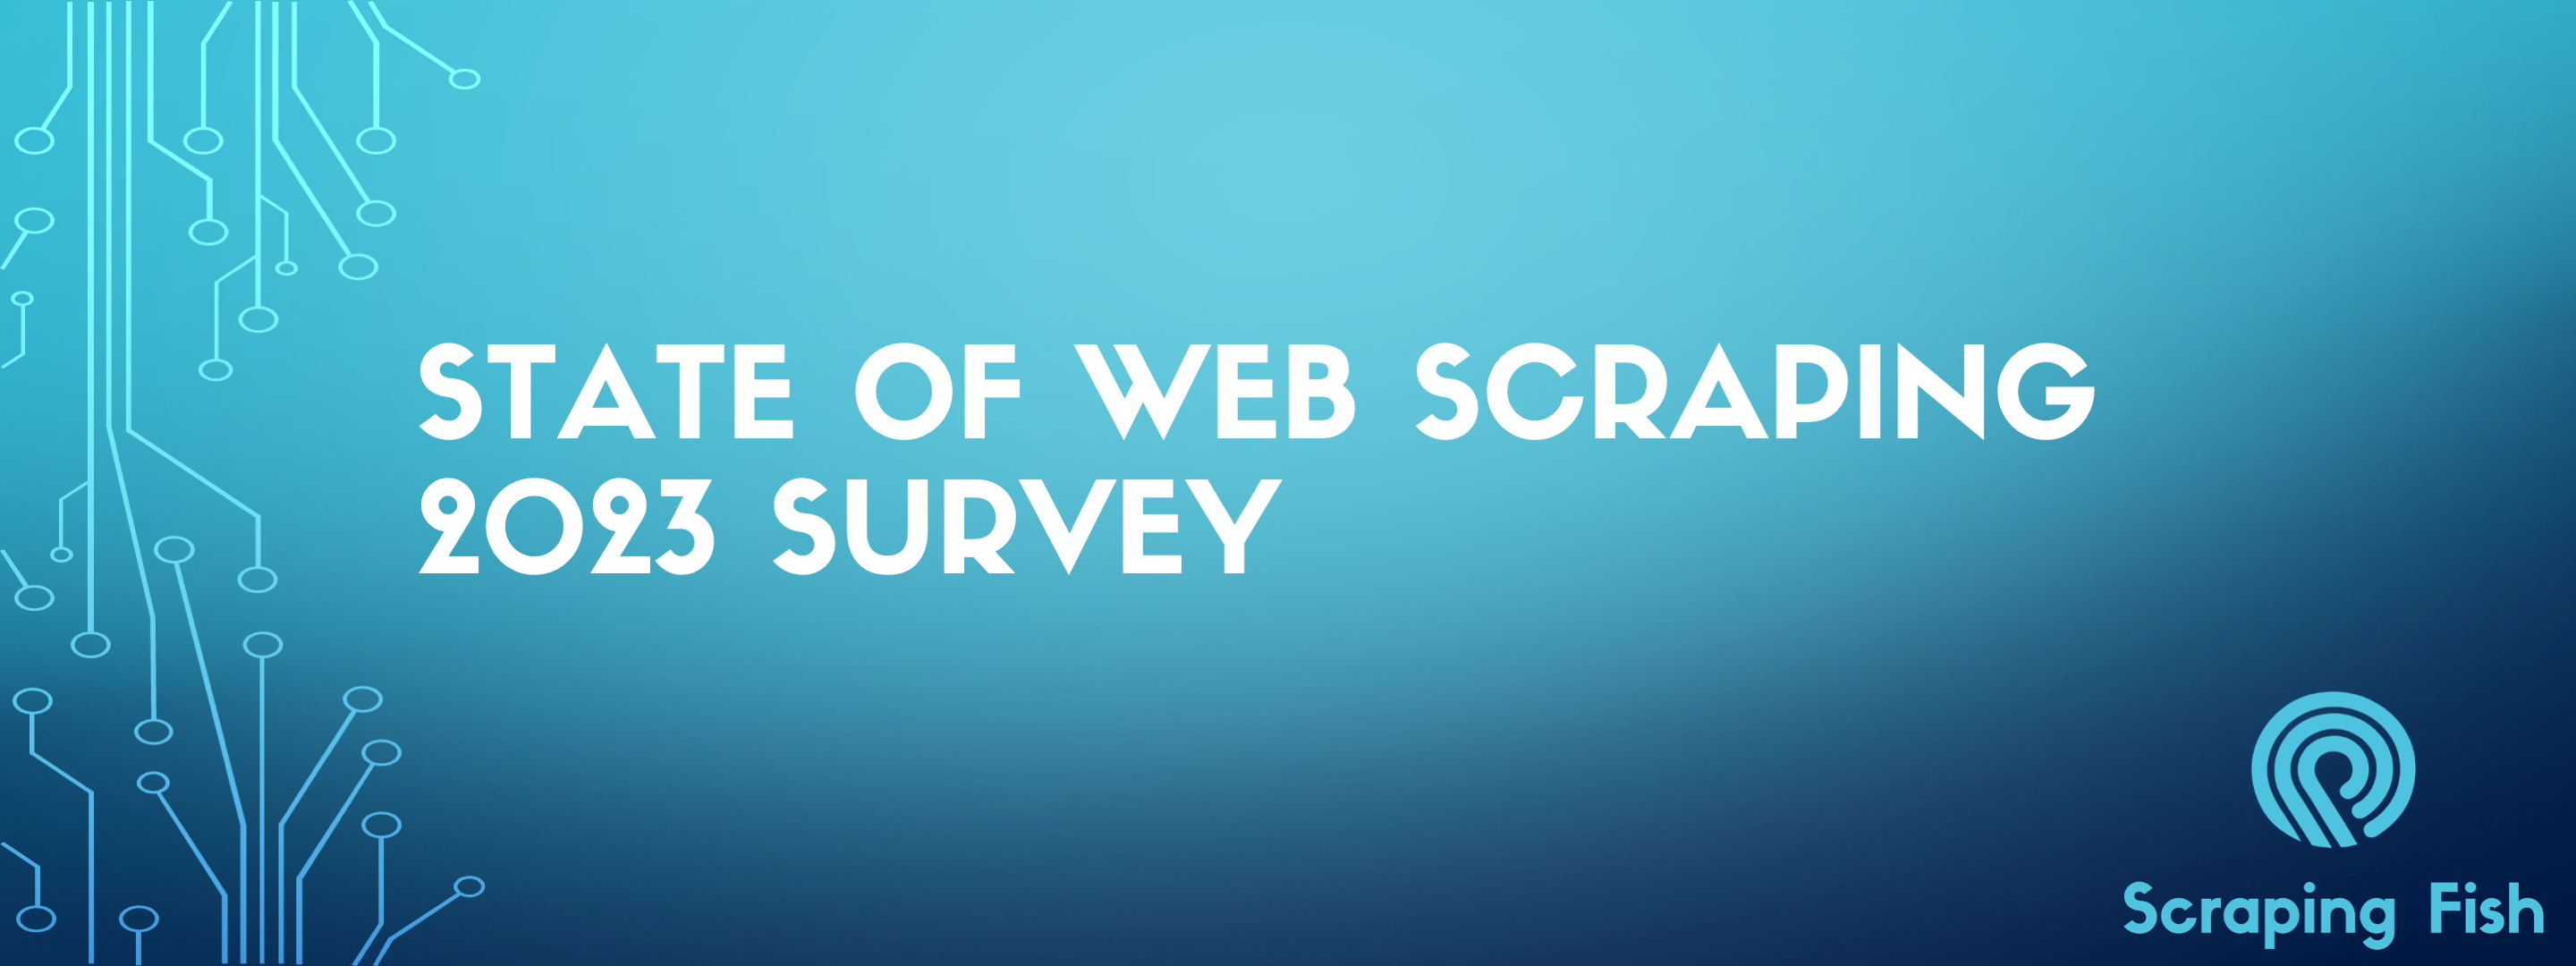 State of Web Scraping 2023 Survey